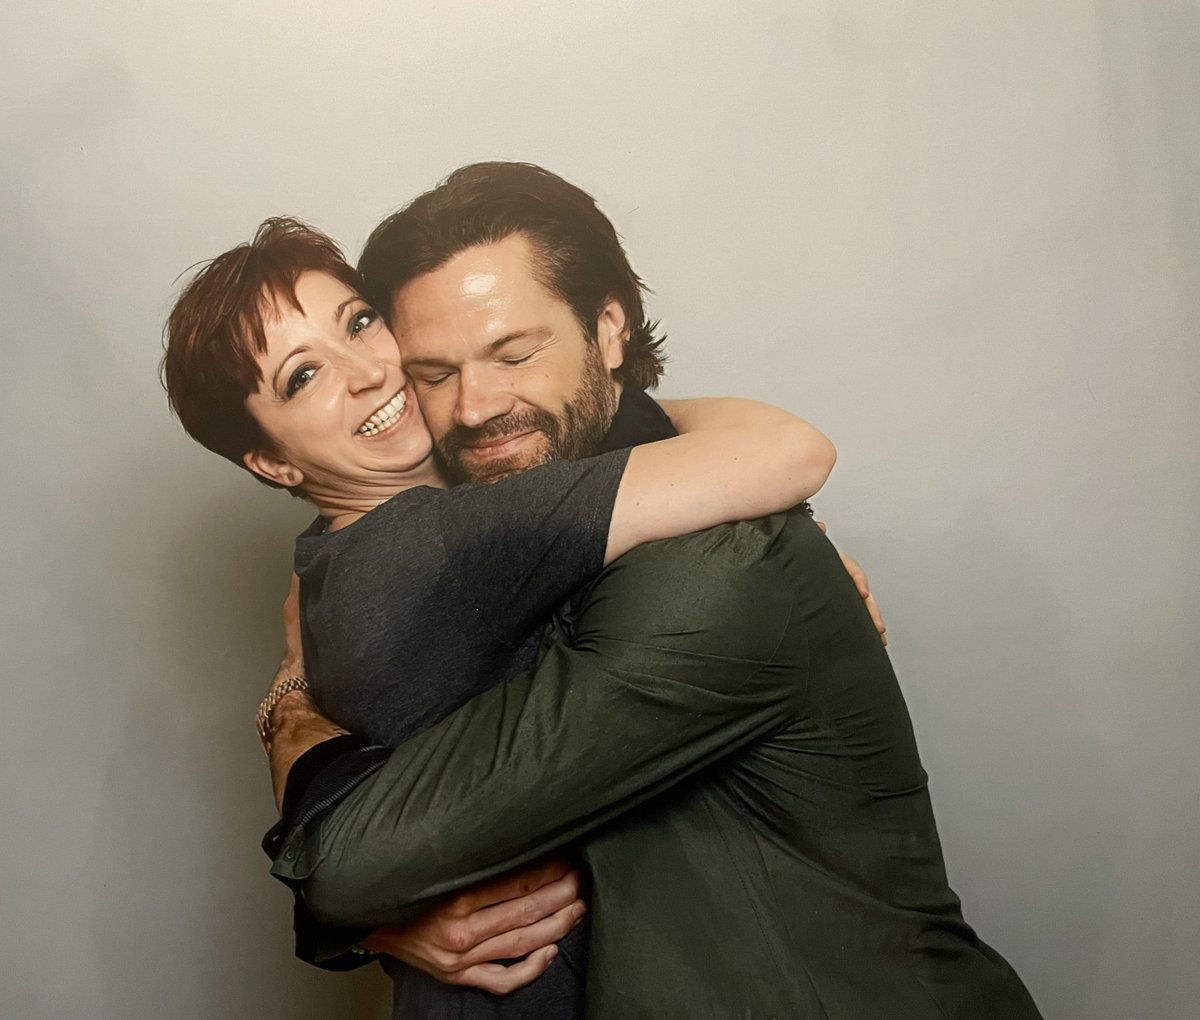 Best birthday hug ever🥰
Thank you @jarpad for making this birthday special one❤️

#jib14 #jibcon #SPNFamily